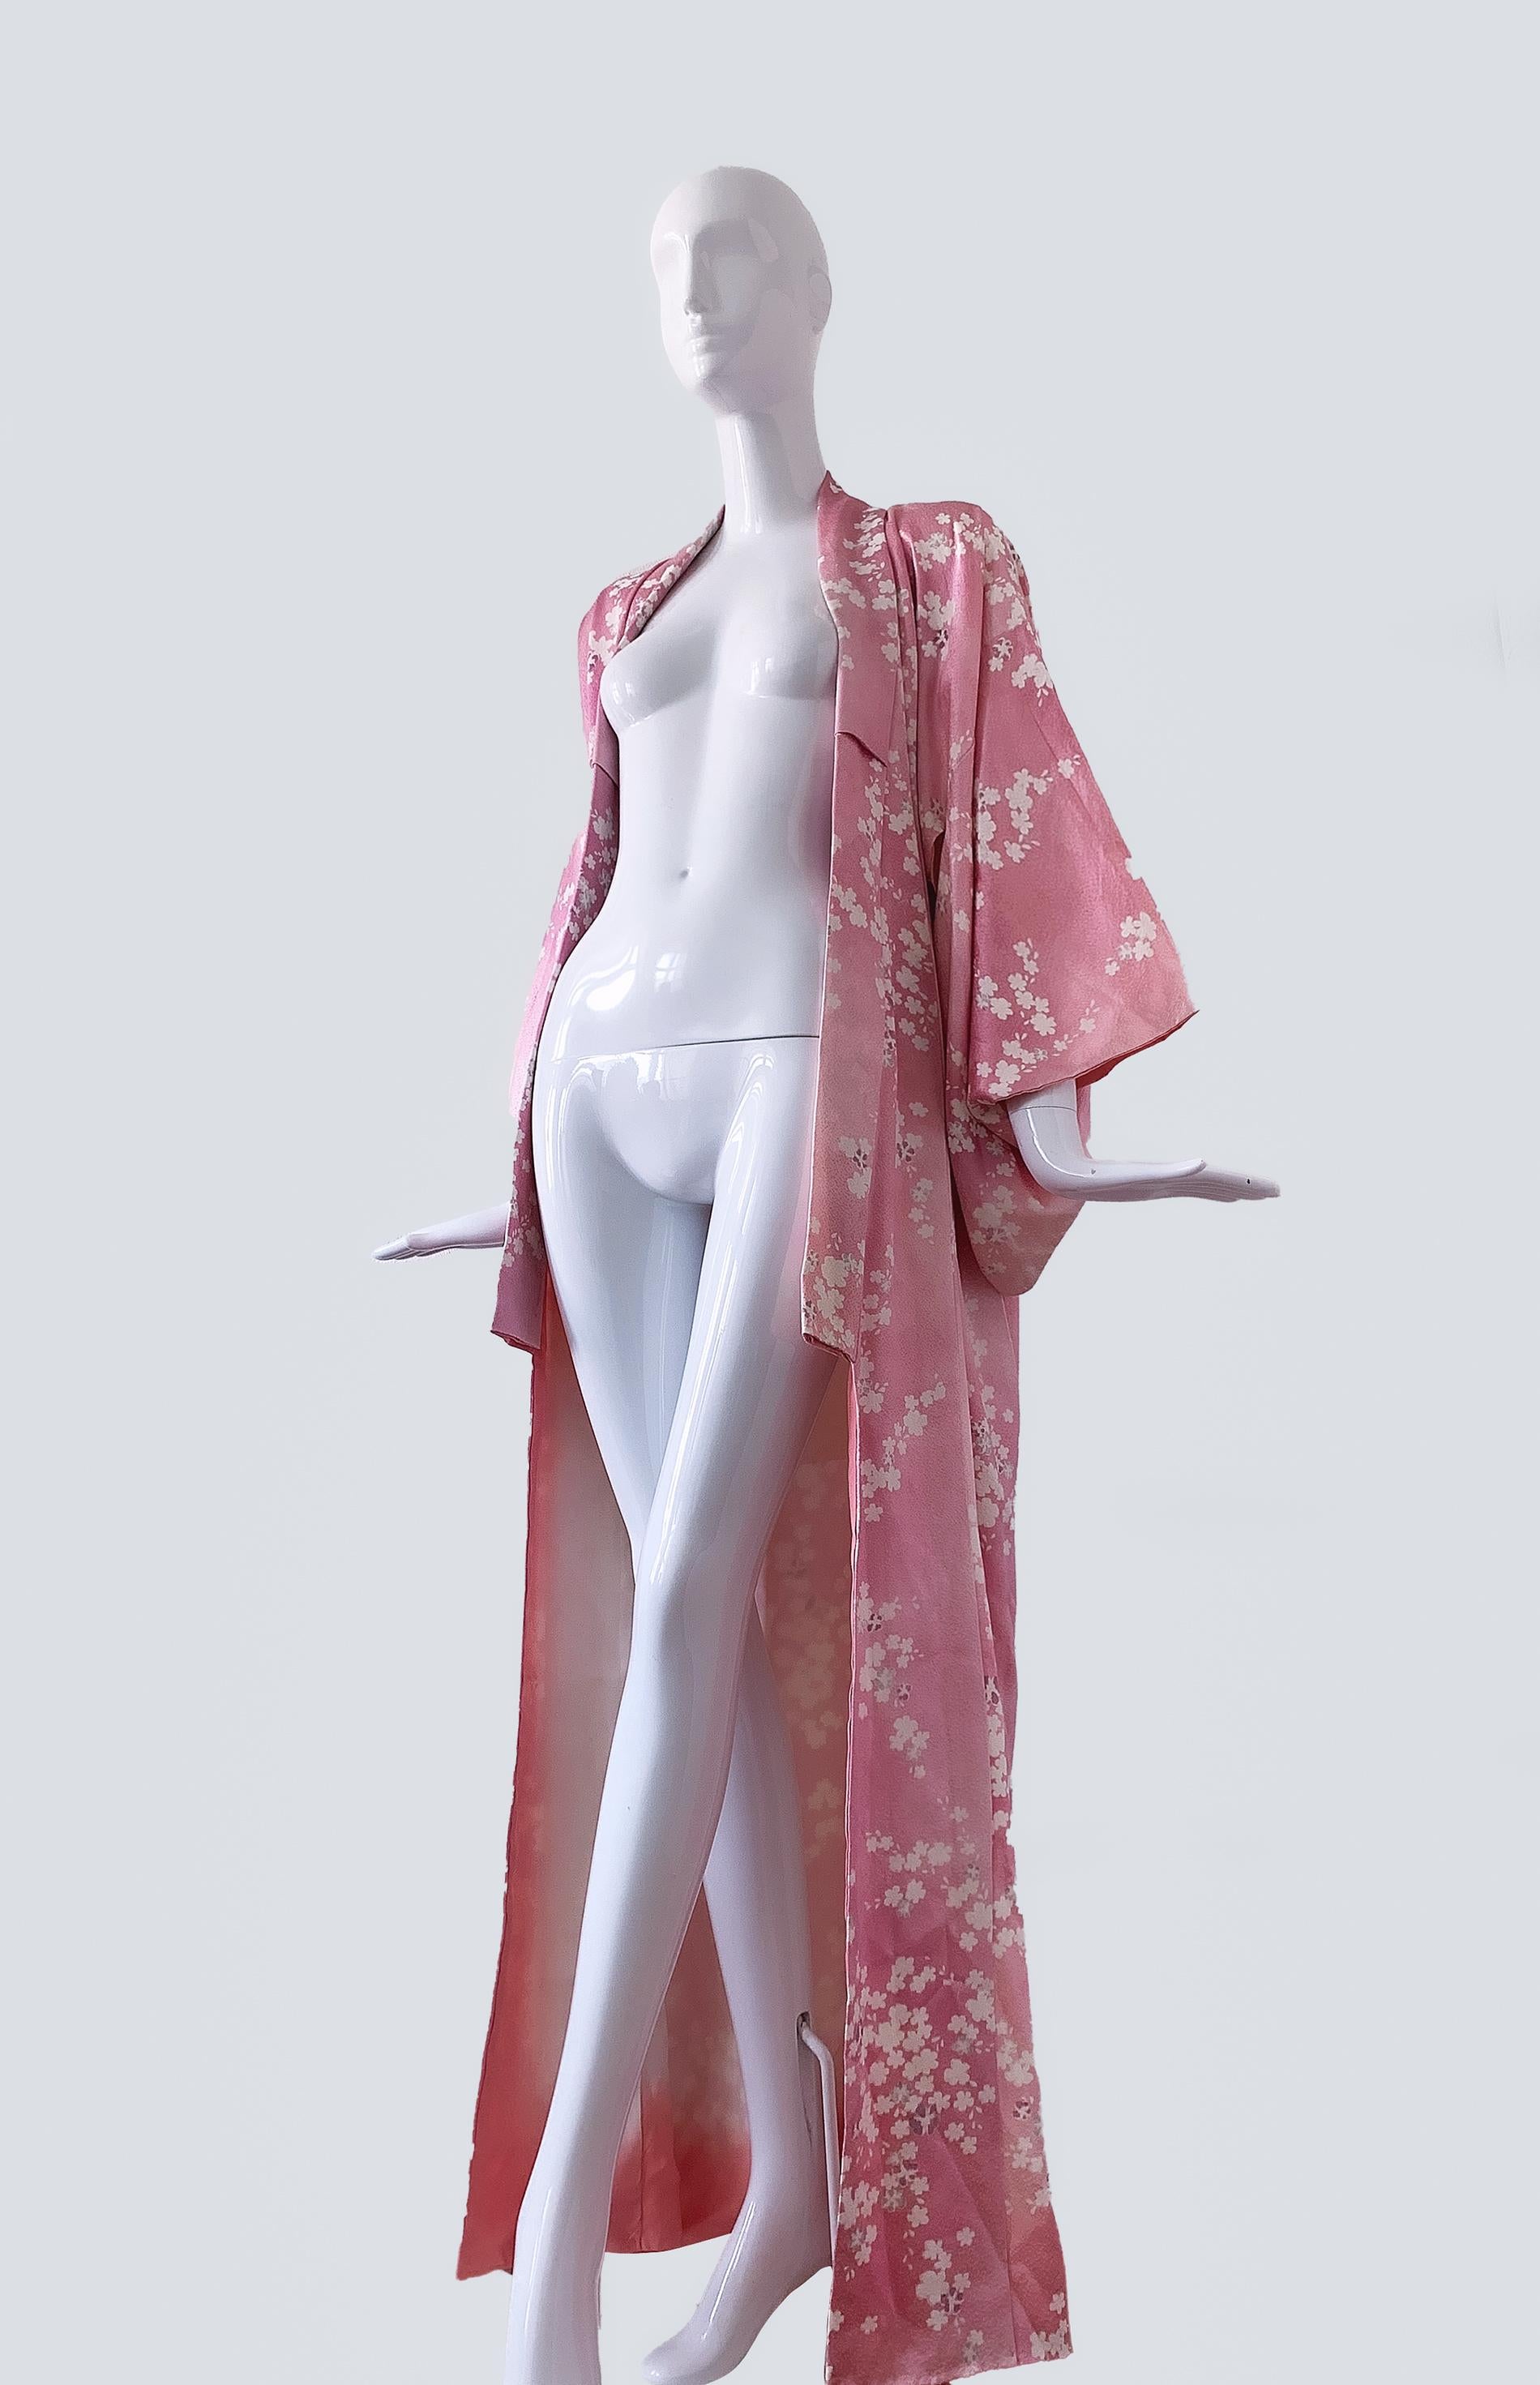 The most gorgeous Vintage Robe, rare one of a kind piece. Assuming late 1940s origin Japanese pure liquid Silk Robe
Beautiful delicate Goddess Robe - Strong Hollyood Glamour Diva Vibes
Long floating loose fit kimono with beautiful soft pink and